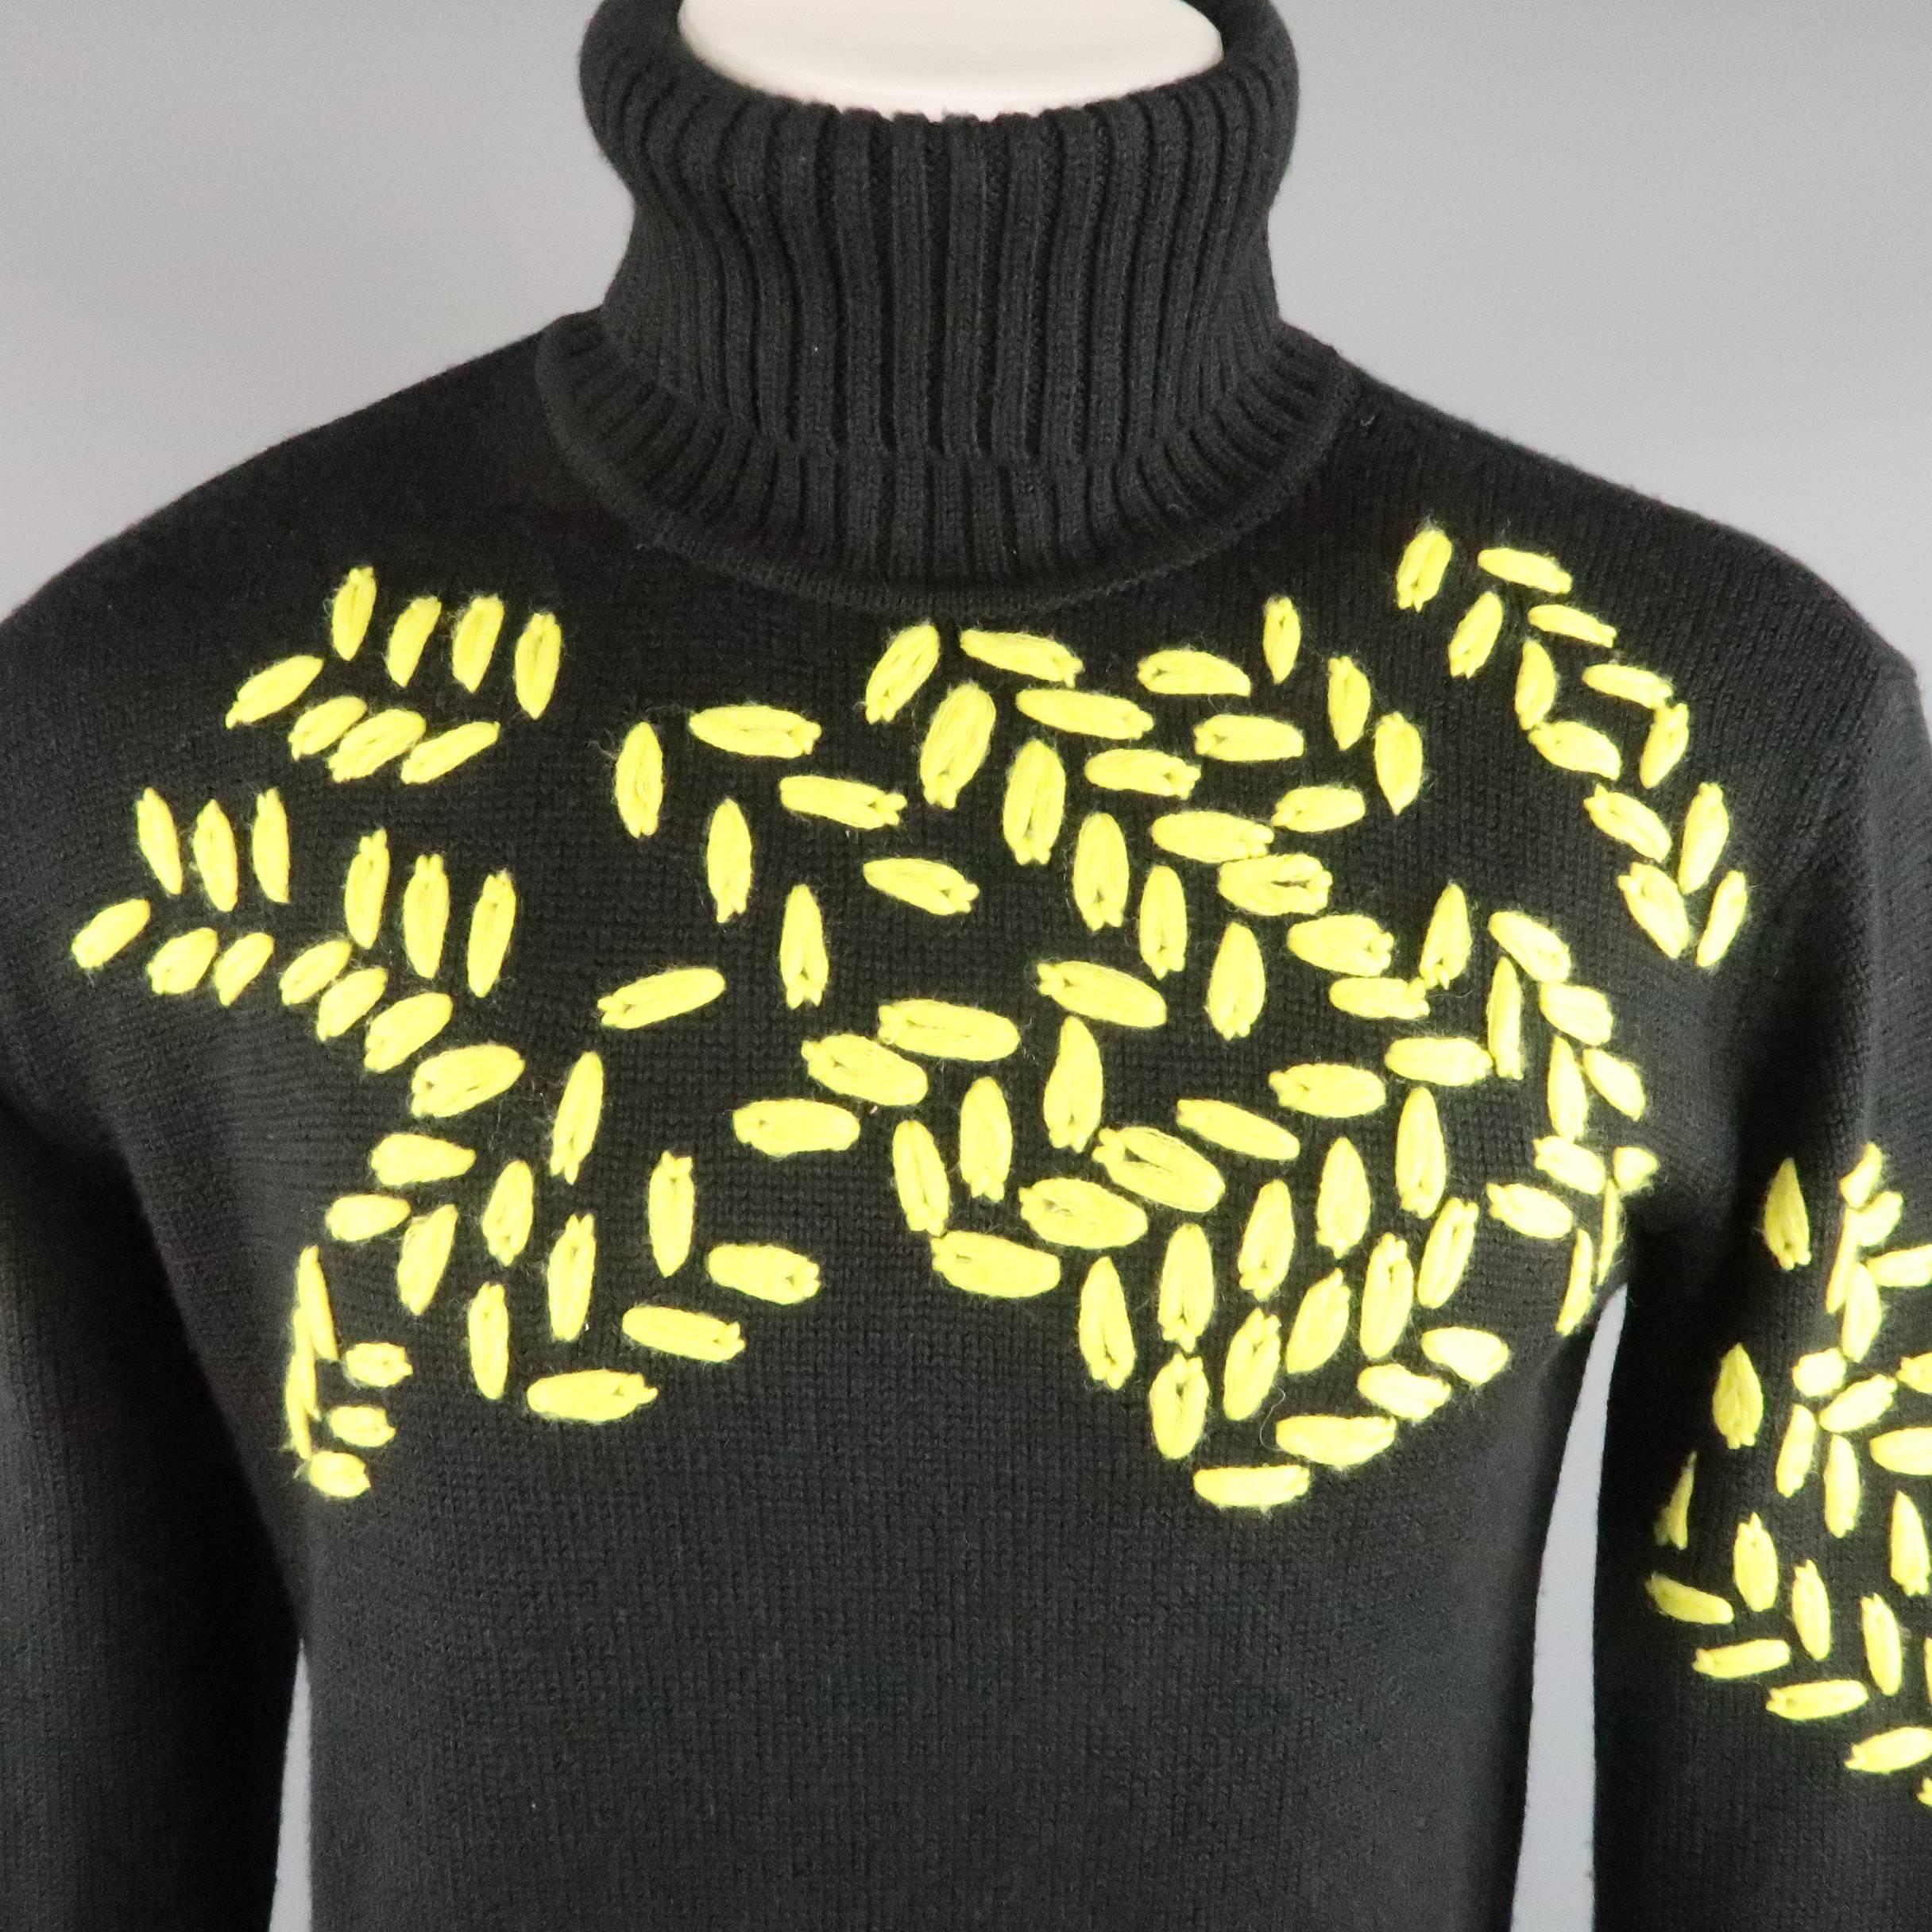 EMPORIO ARMANI EA7 turtleneck sweater comes in a wool blend knit and features a bright yellow embroidered pattern along the chest.
 
Excellent Pre-Owned Condition.
Marked: S
 
Measurements:
 
Shoulder: 1 in.
Chest: 44 in.
Sleeve: 26 in.
Length: 25